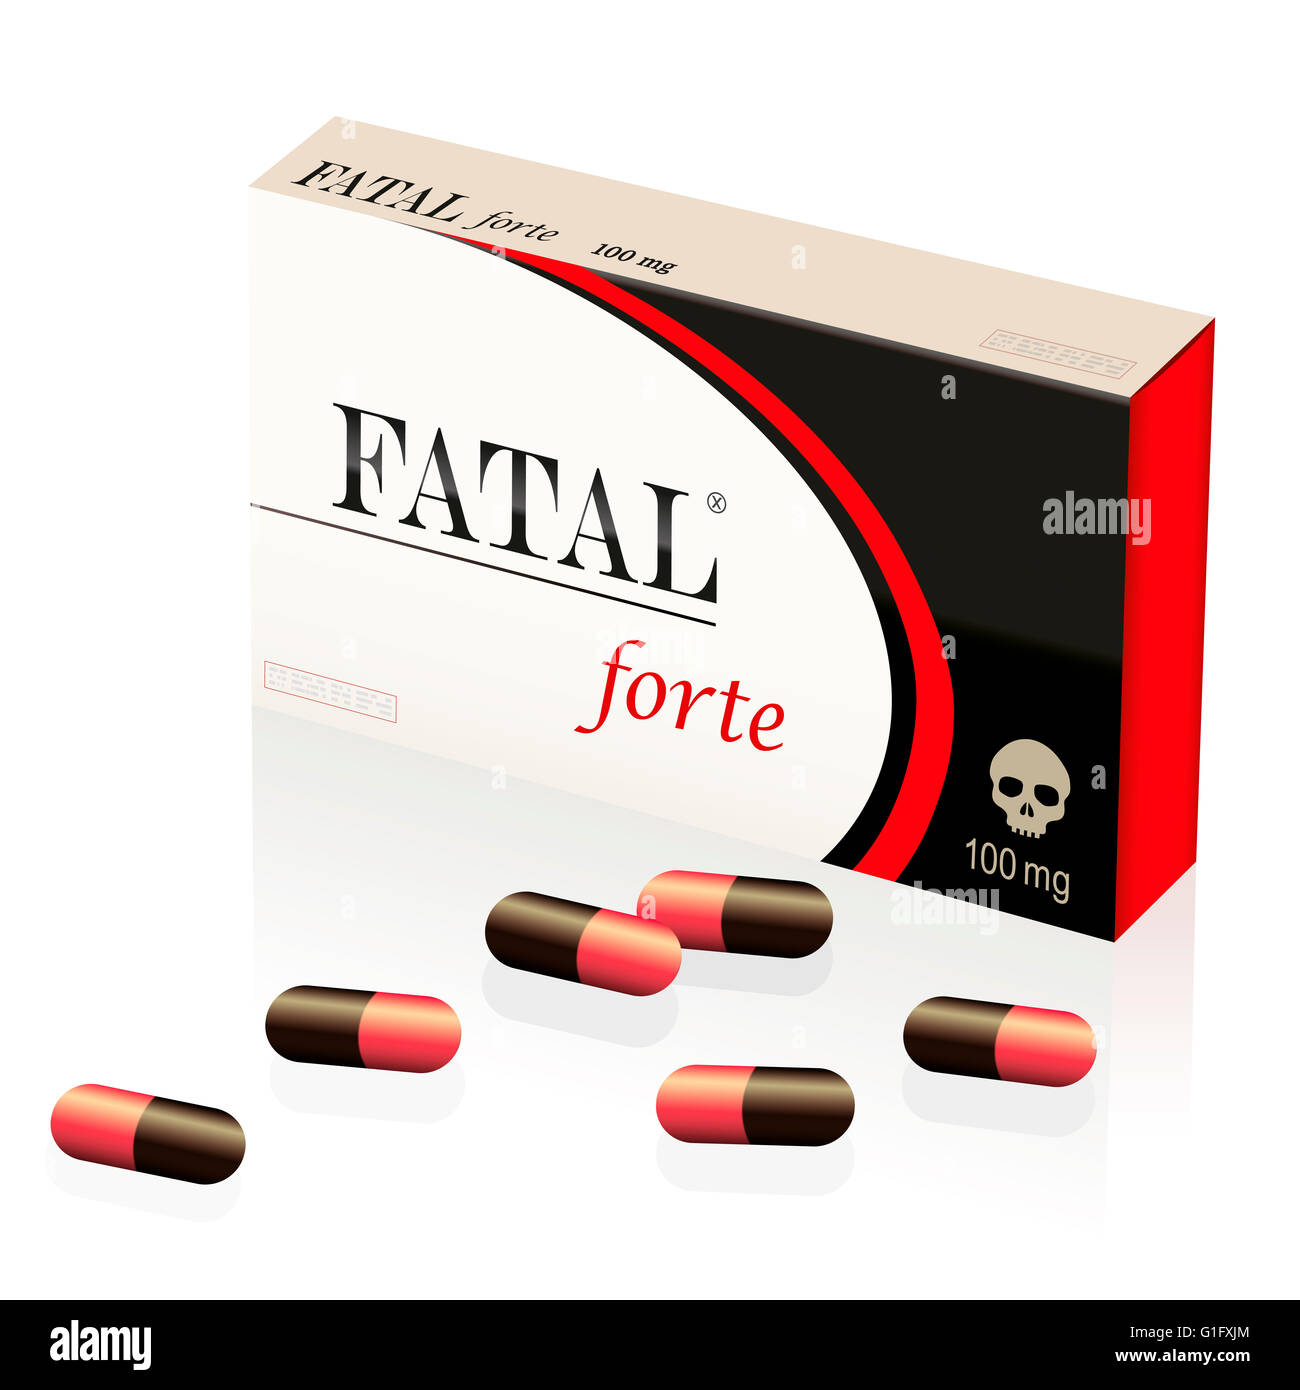 Fatal, lethal, deadly pills, symbolized by a fake medicine packet named FATAL FORTE with a skull as brand logo on it. Stock Photo